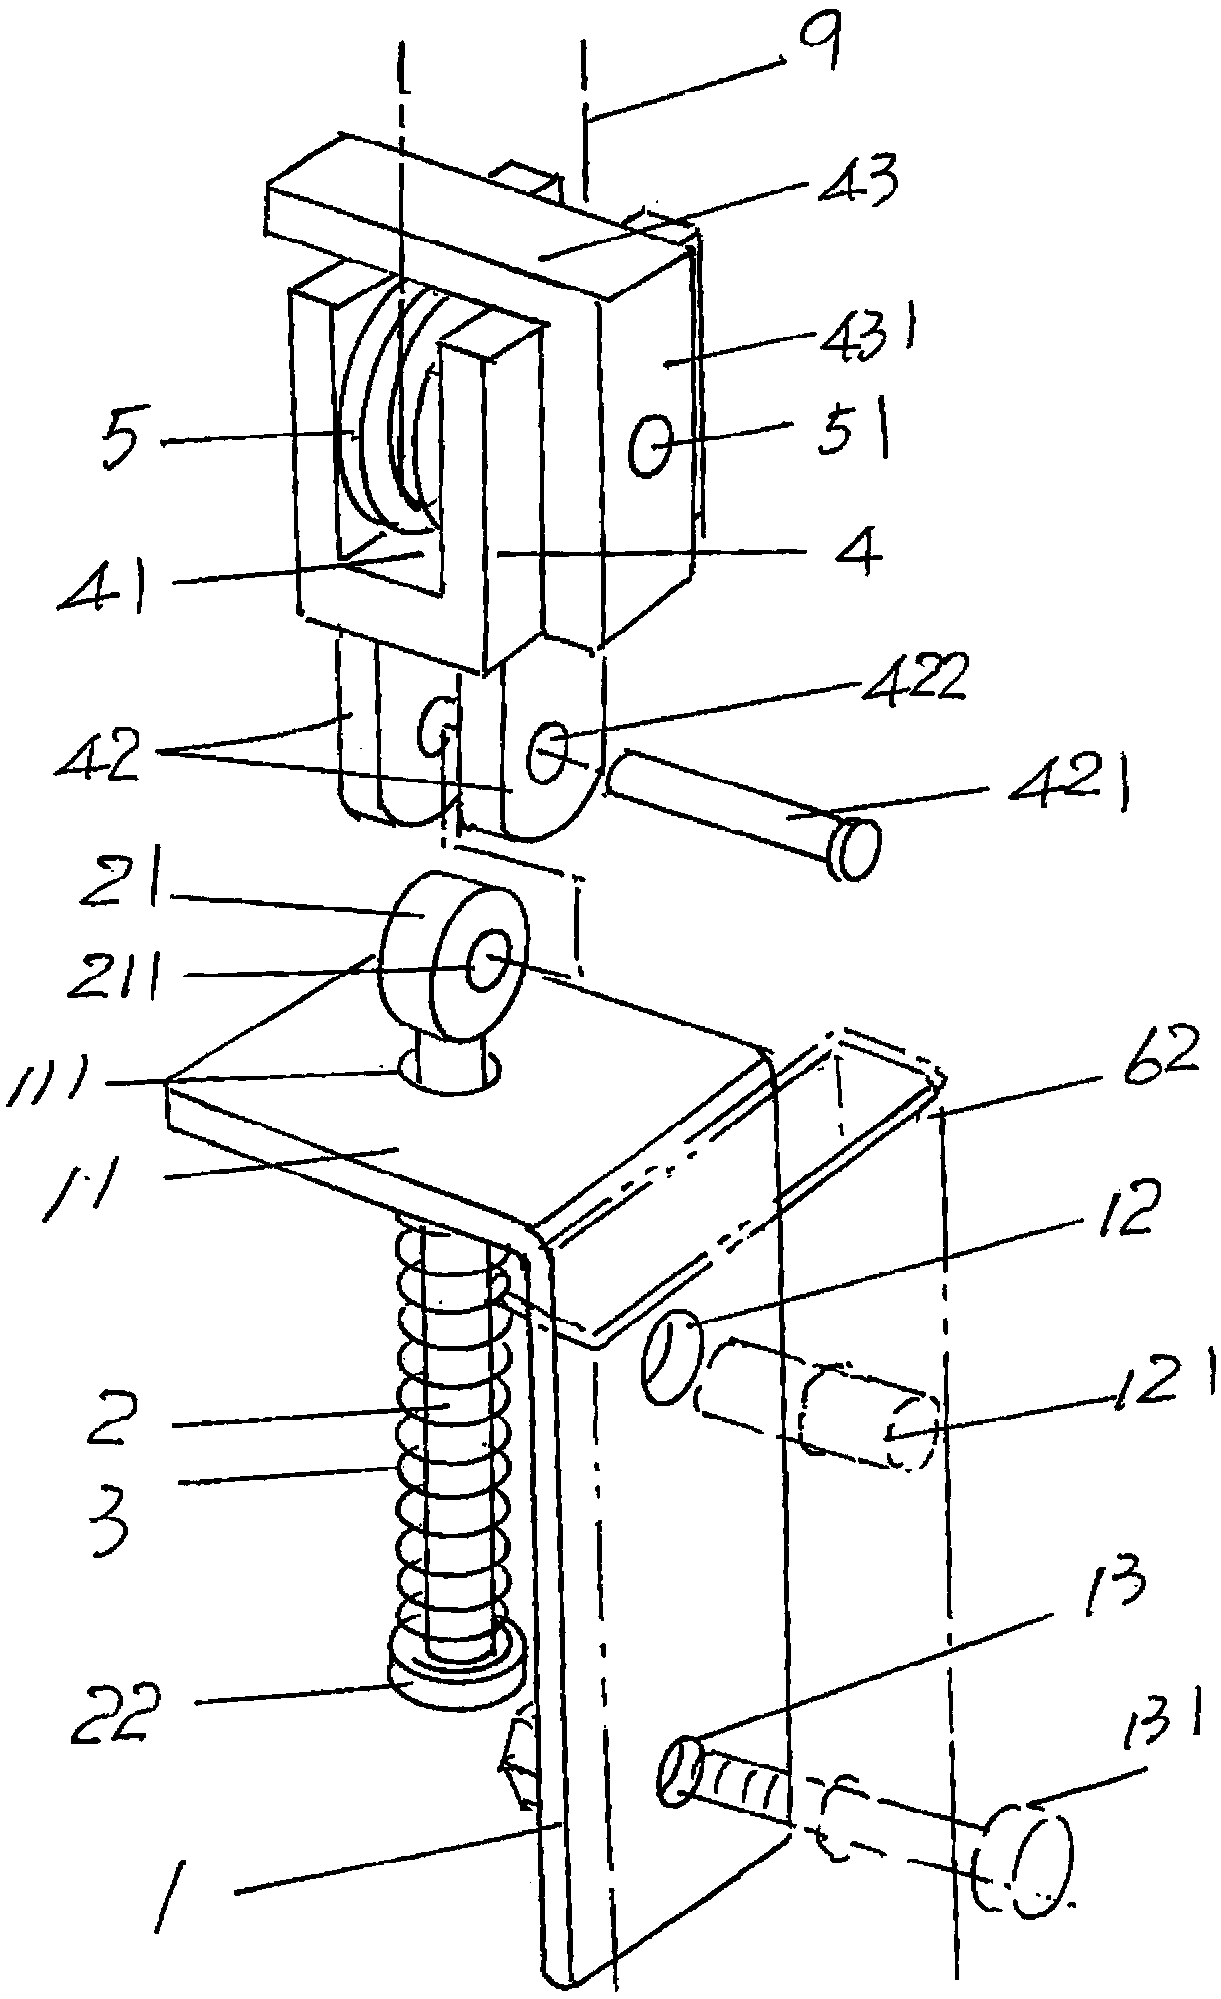 Pulling rope tensioning device of hollow glass with built-in shutter